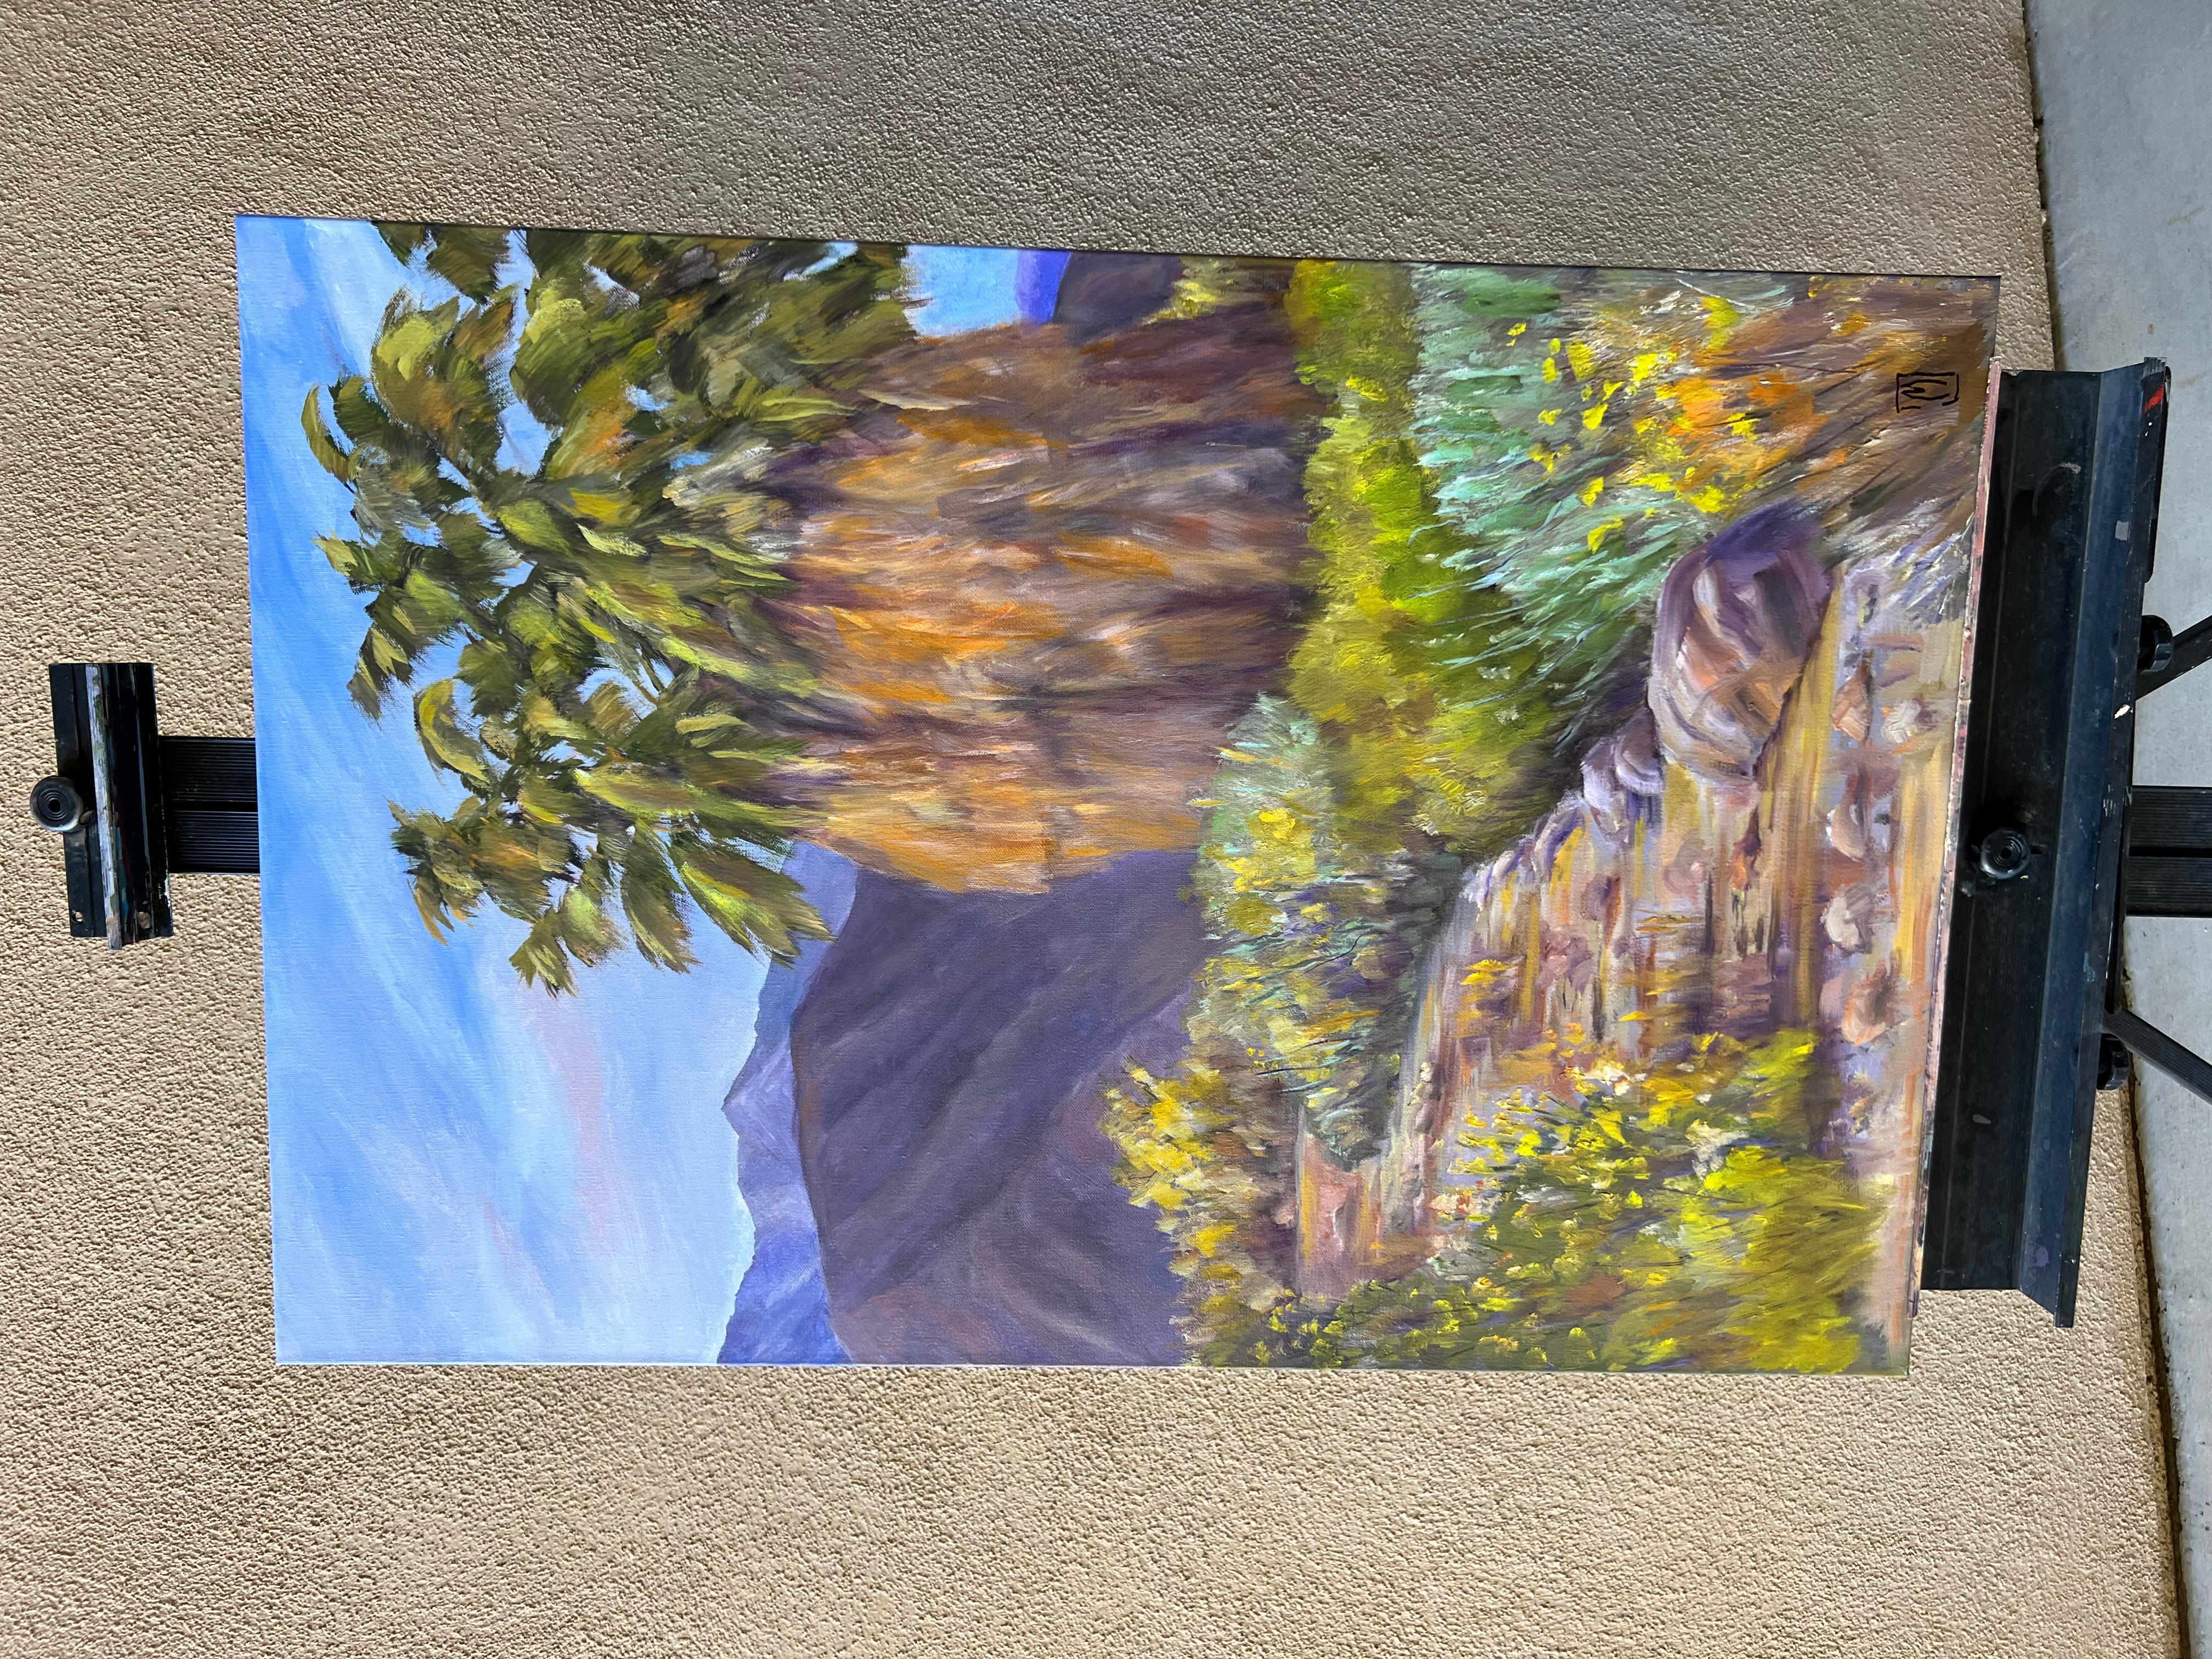 <p>Artist Comments<br>Artist Marilyn Froggatt presents an impression of Palm Canyon State Park. A lazy path to the desert welcomes the gaze of the viewer. By the visitor's area, a garden with the local palms growing with their skirts intact reveals